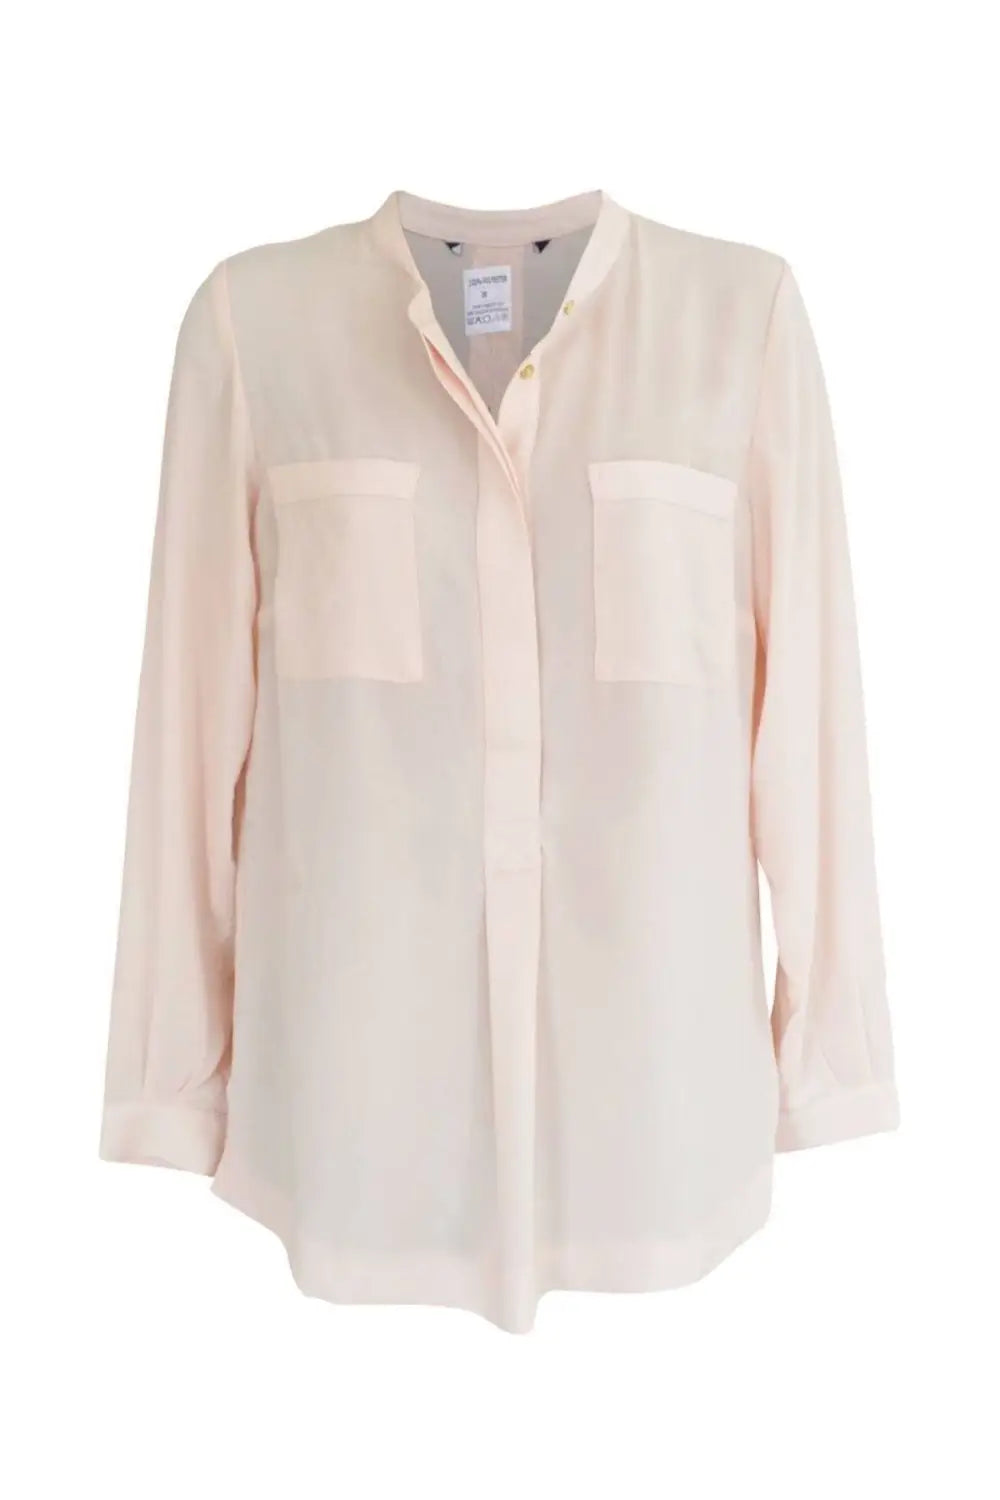 M&S Silky Tunic Blouse